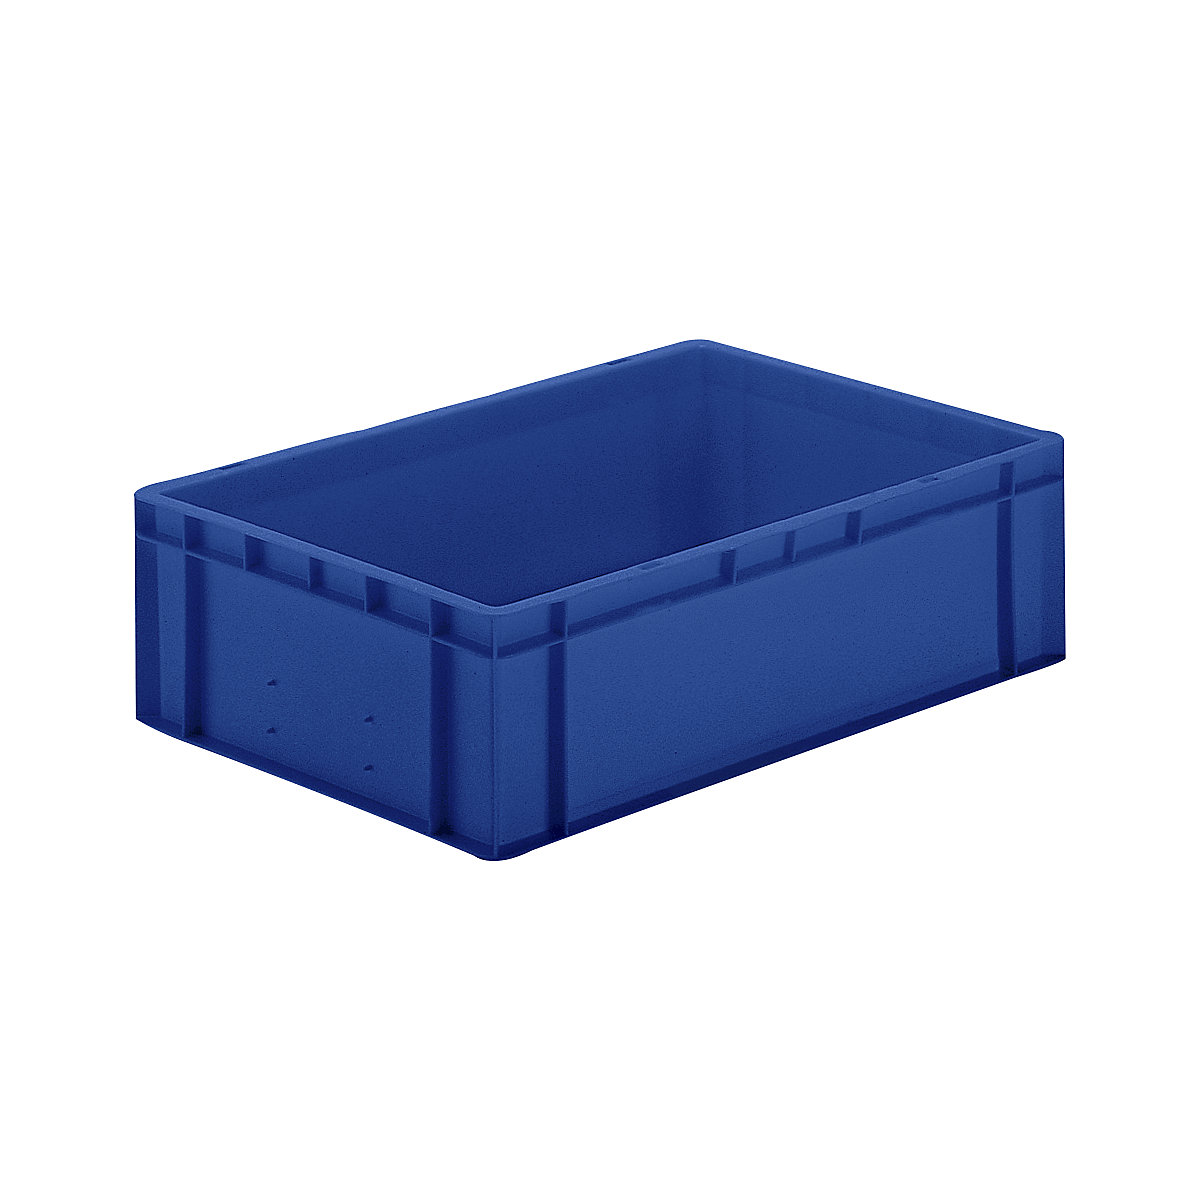 Euro stacking container, closed walls and base, LxWxH 600 x 400 x 175 mm, blue, pack of 5-6